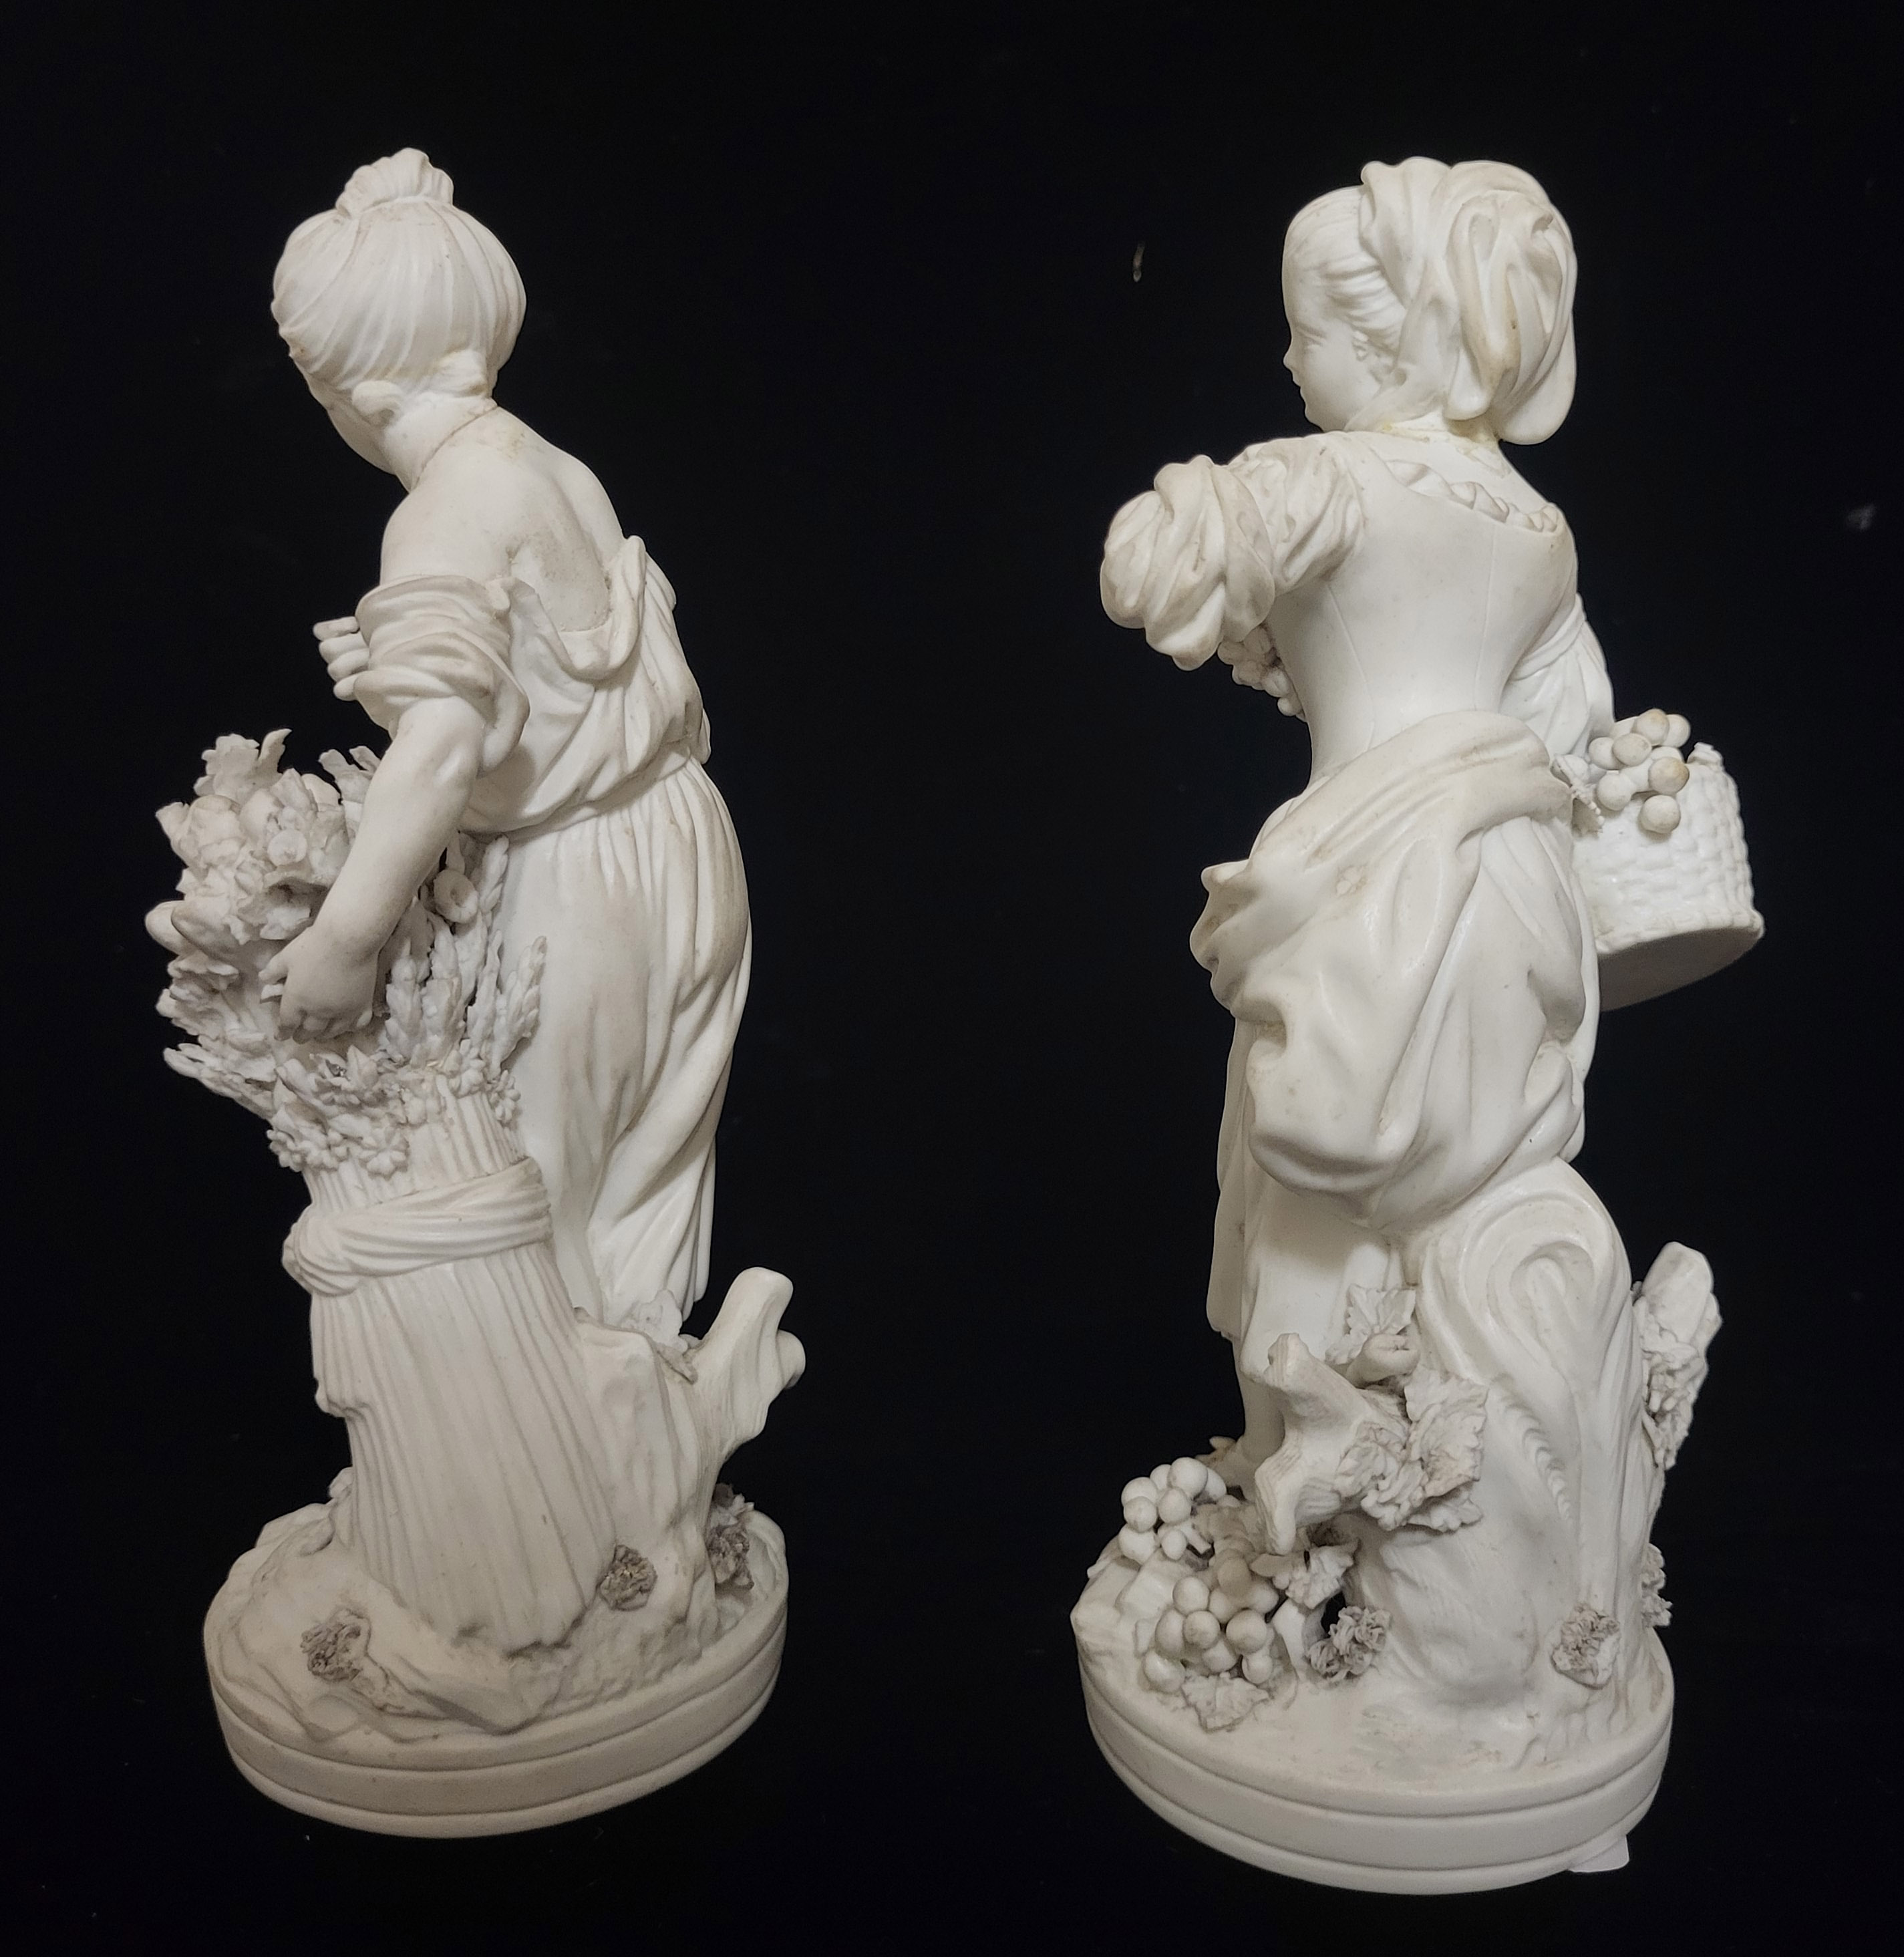 A PAIR OF EARLY 19TH CENTURY DERBY BLANC DE CHINE PORCELAIN FIGURES Female characters wearing period - Image 8 of 11